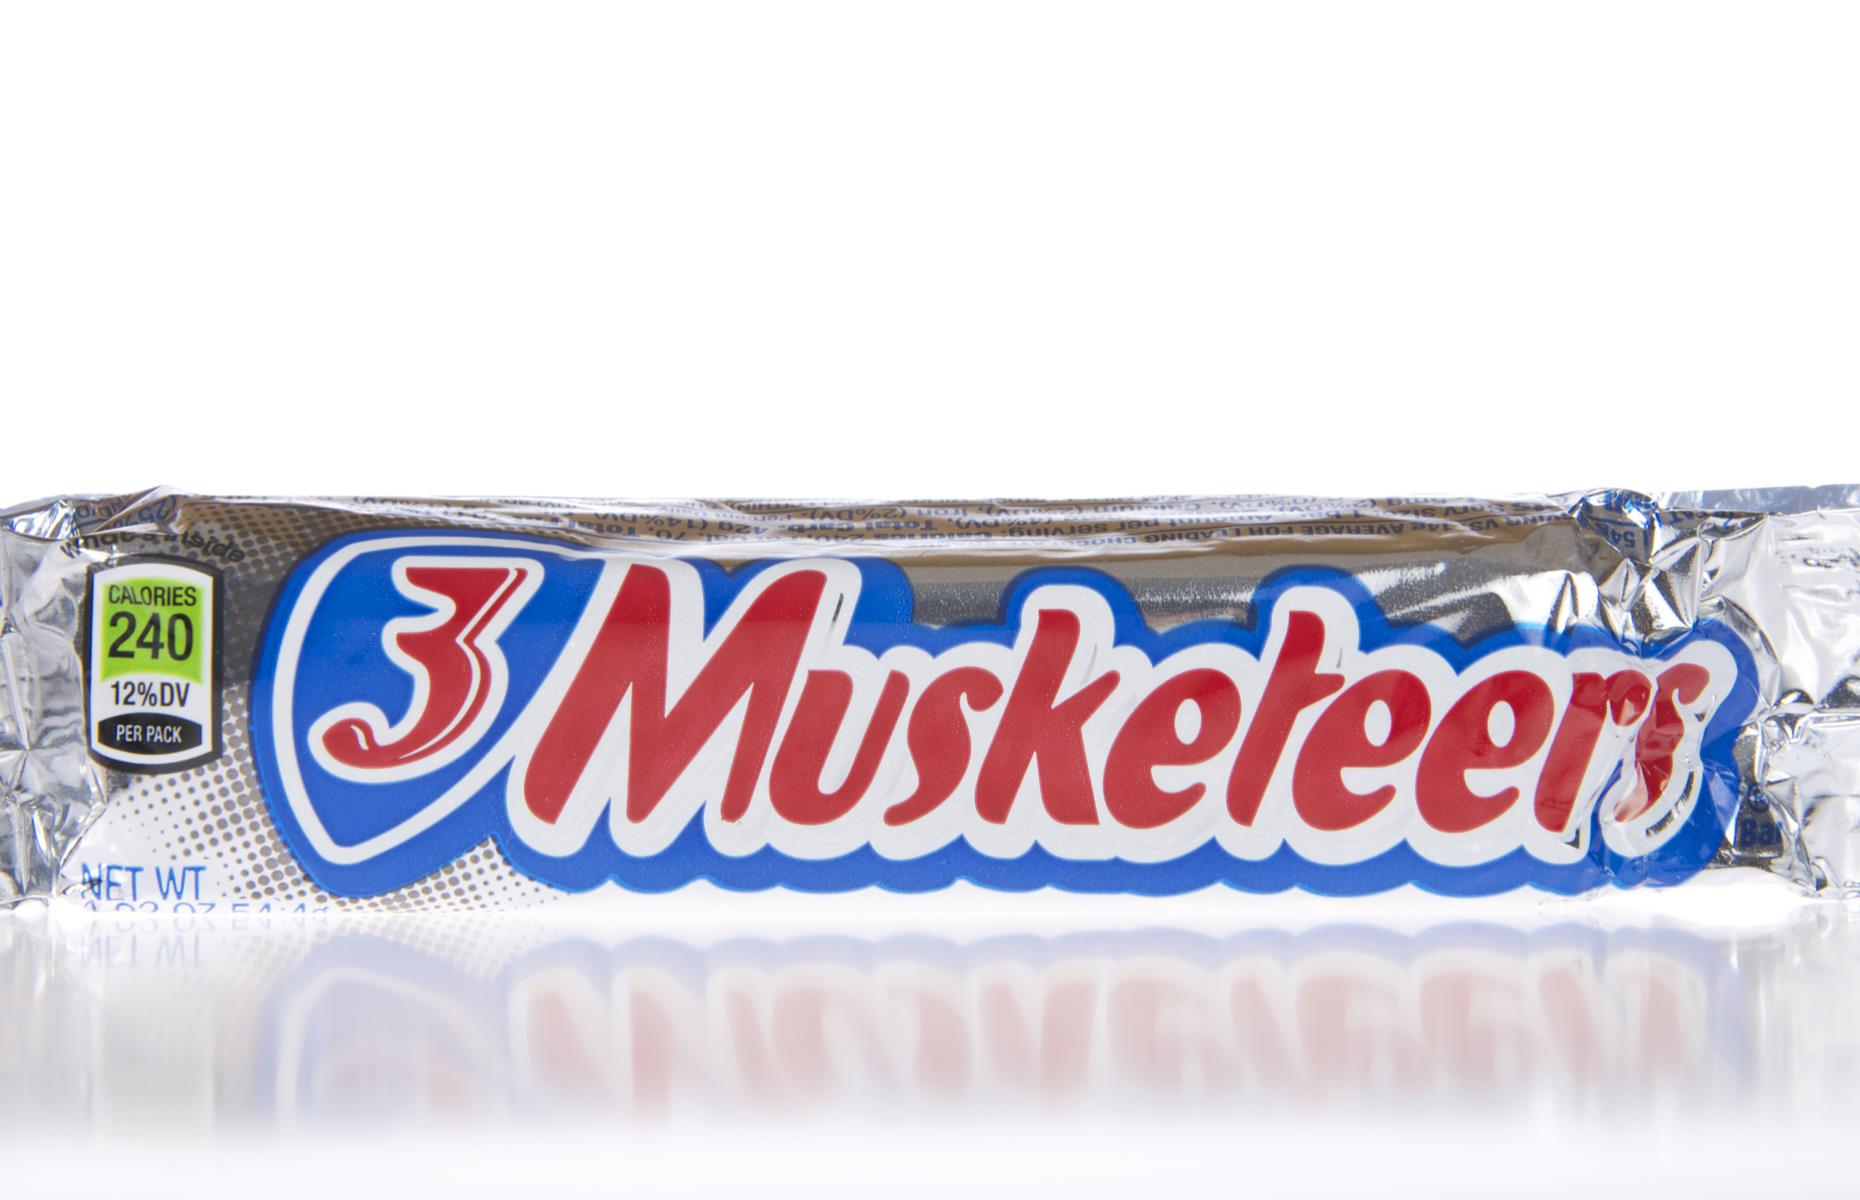 Can you guess what a 3 Musketeers bar is called in the UK?